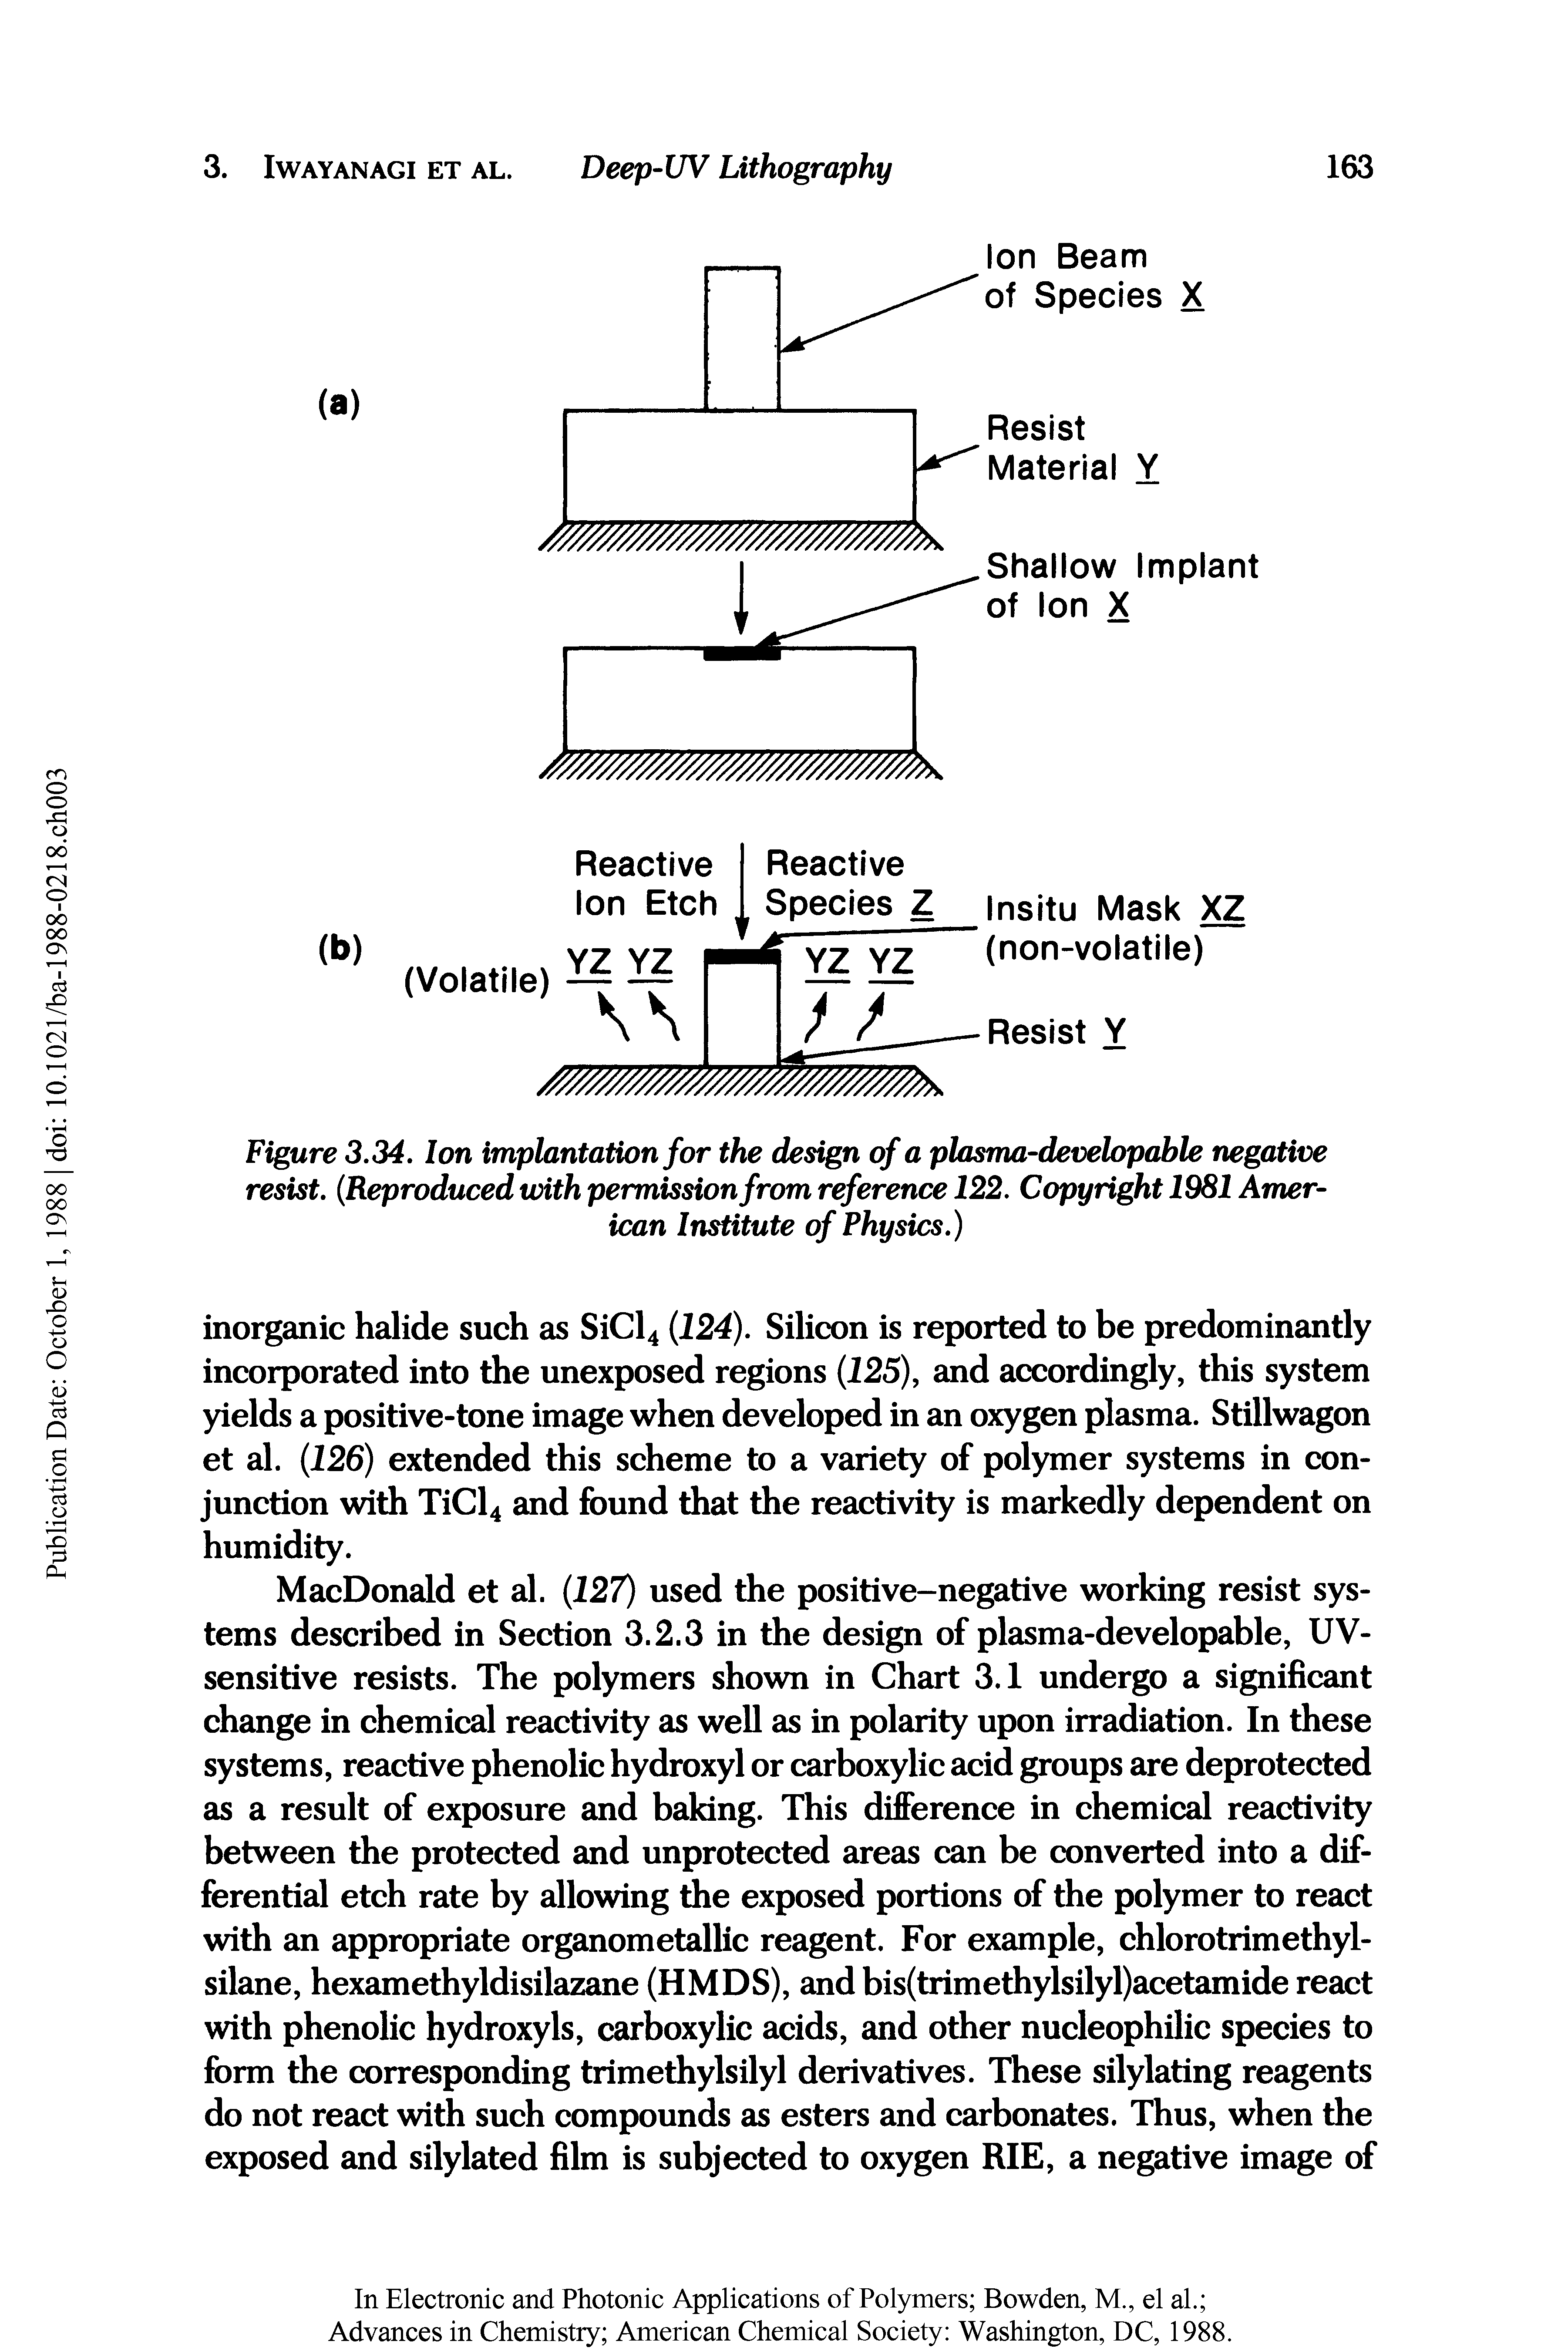 Figure 3.34. Ion implantation for the design of a plasma-developable negative resist. Reproduced with permission from reference 122. Copyright 1981 American Institute of Physics.)...